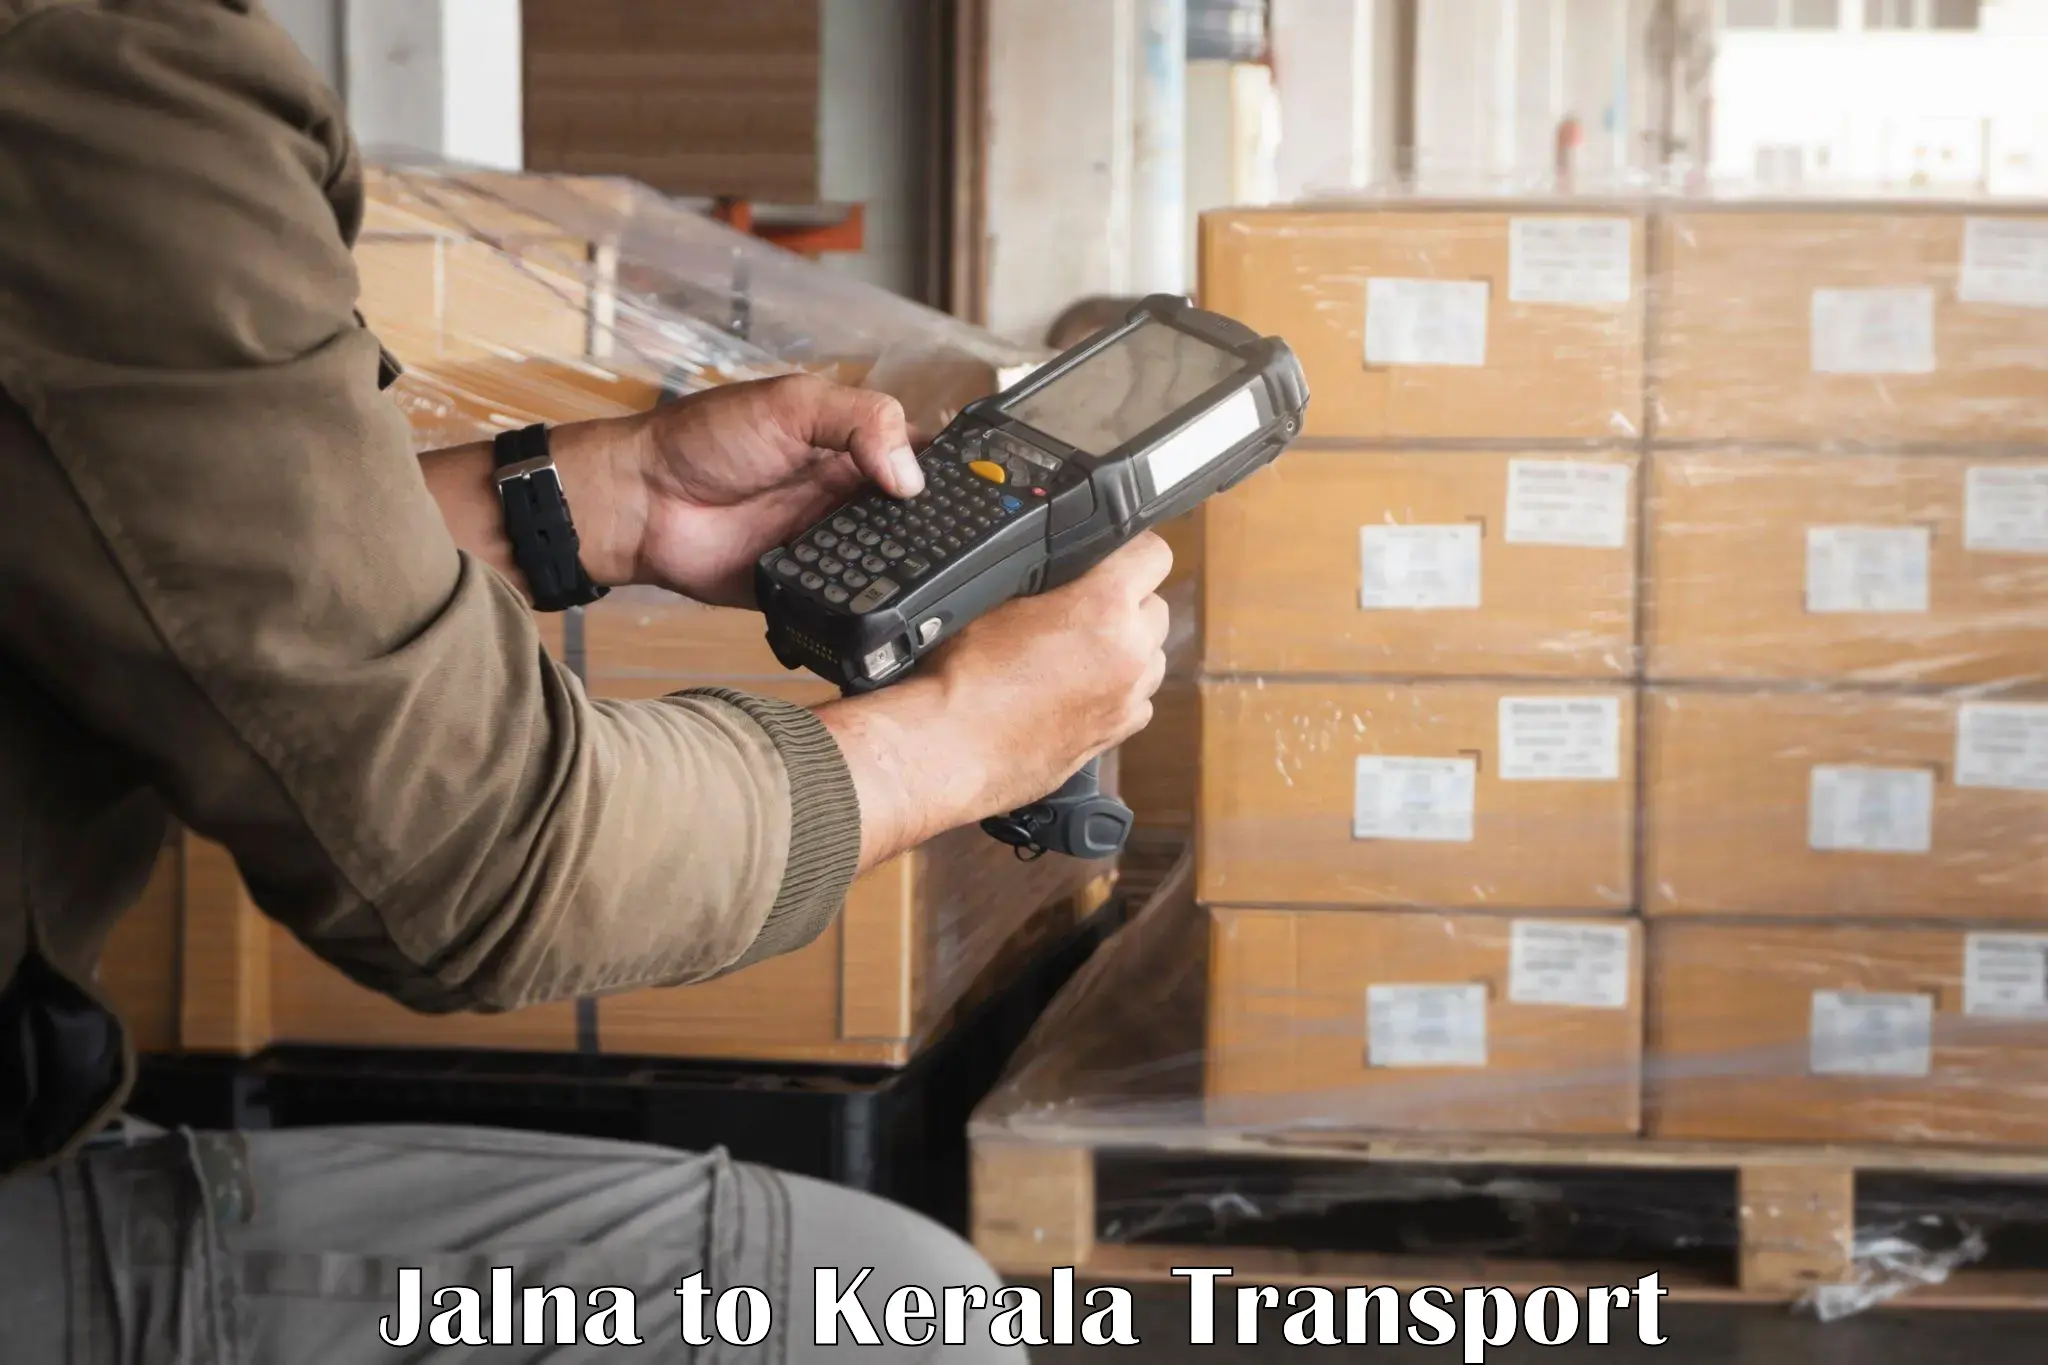 Goods delivery service Jalna to Kerala